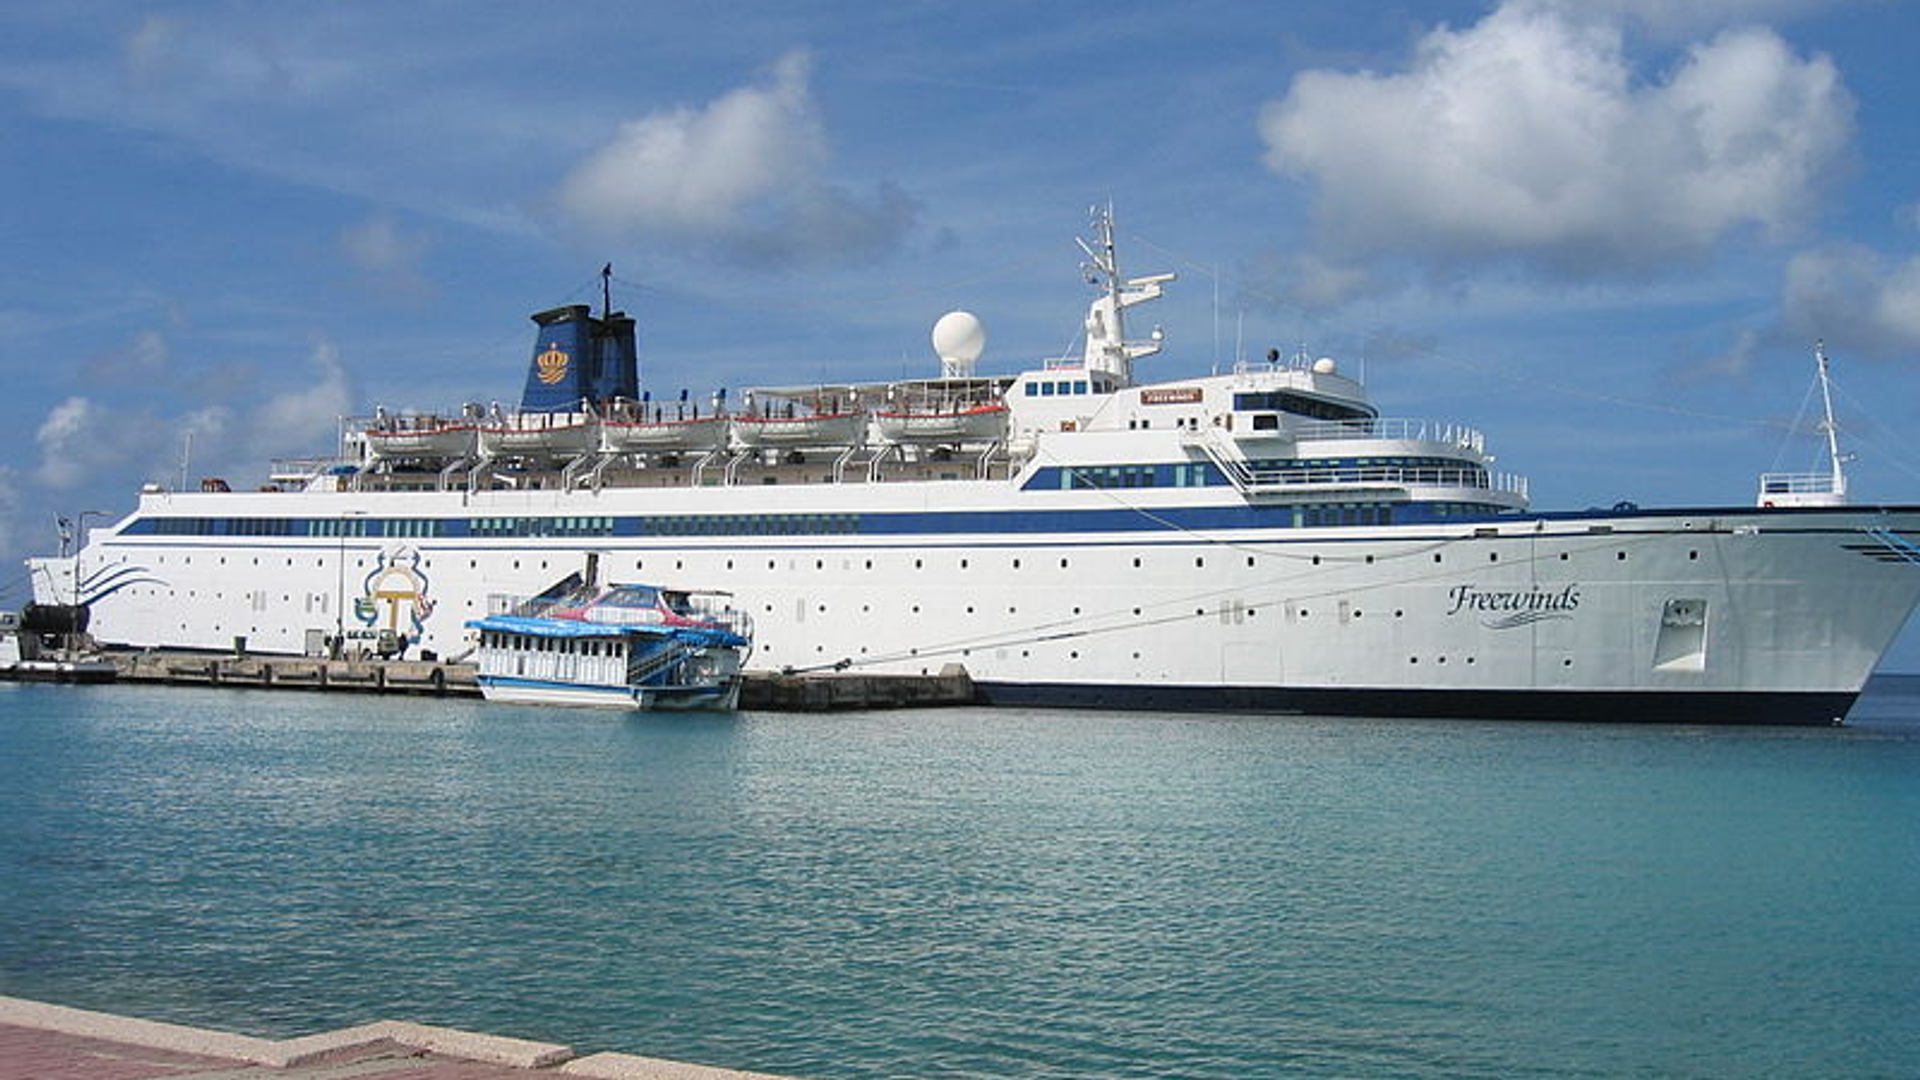 800px-Freewinds_starboard